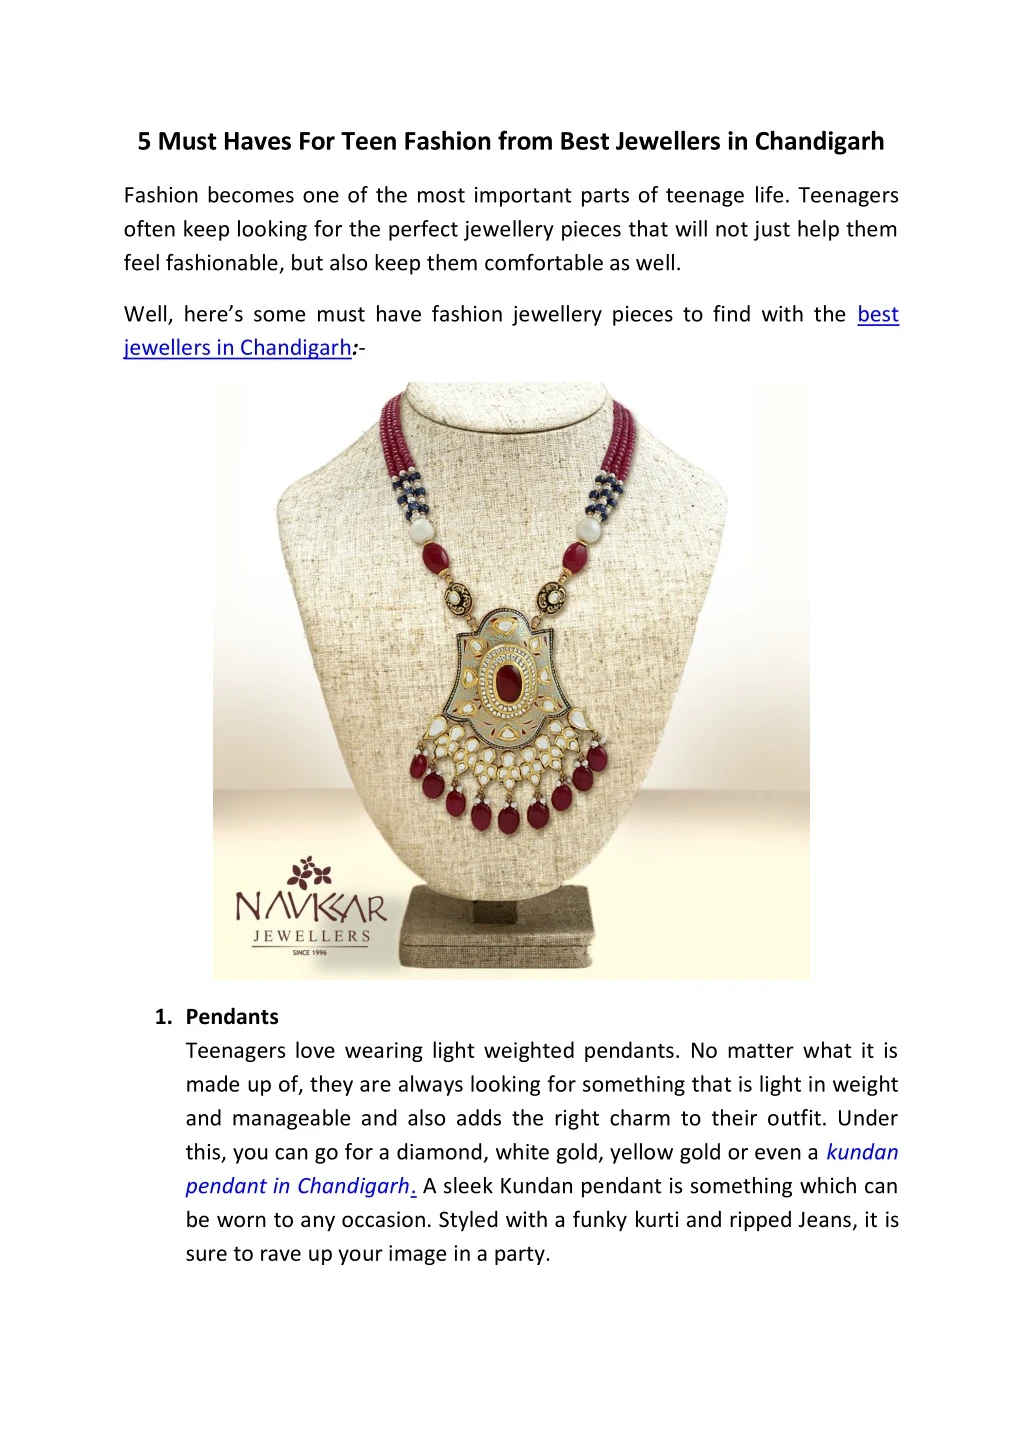 5 must haves for teen fashion from best jewellers